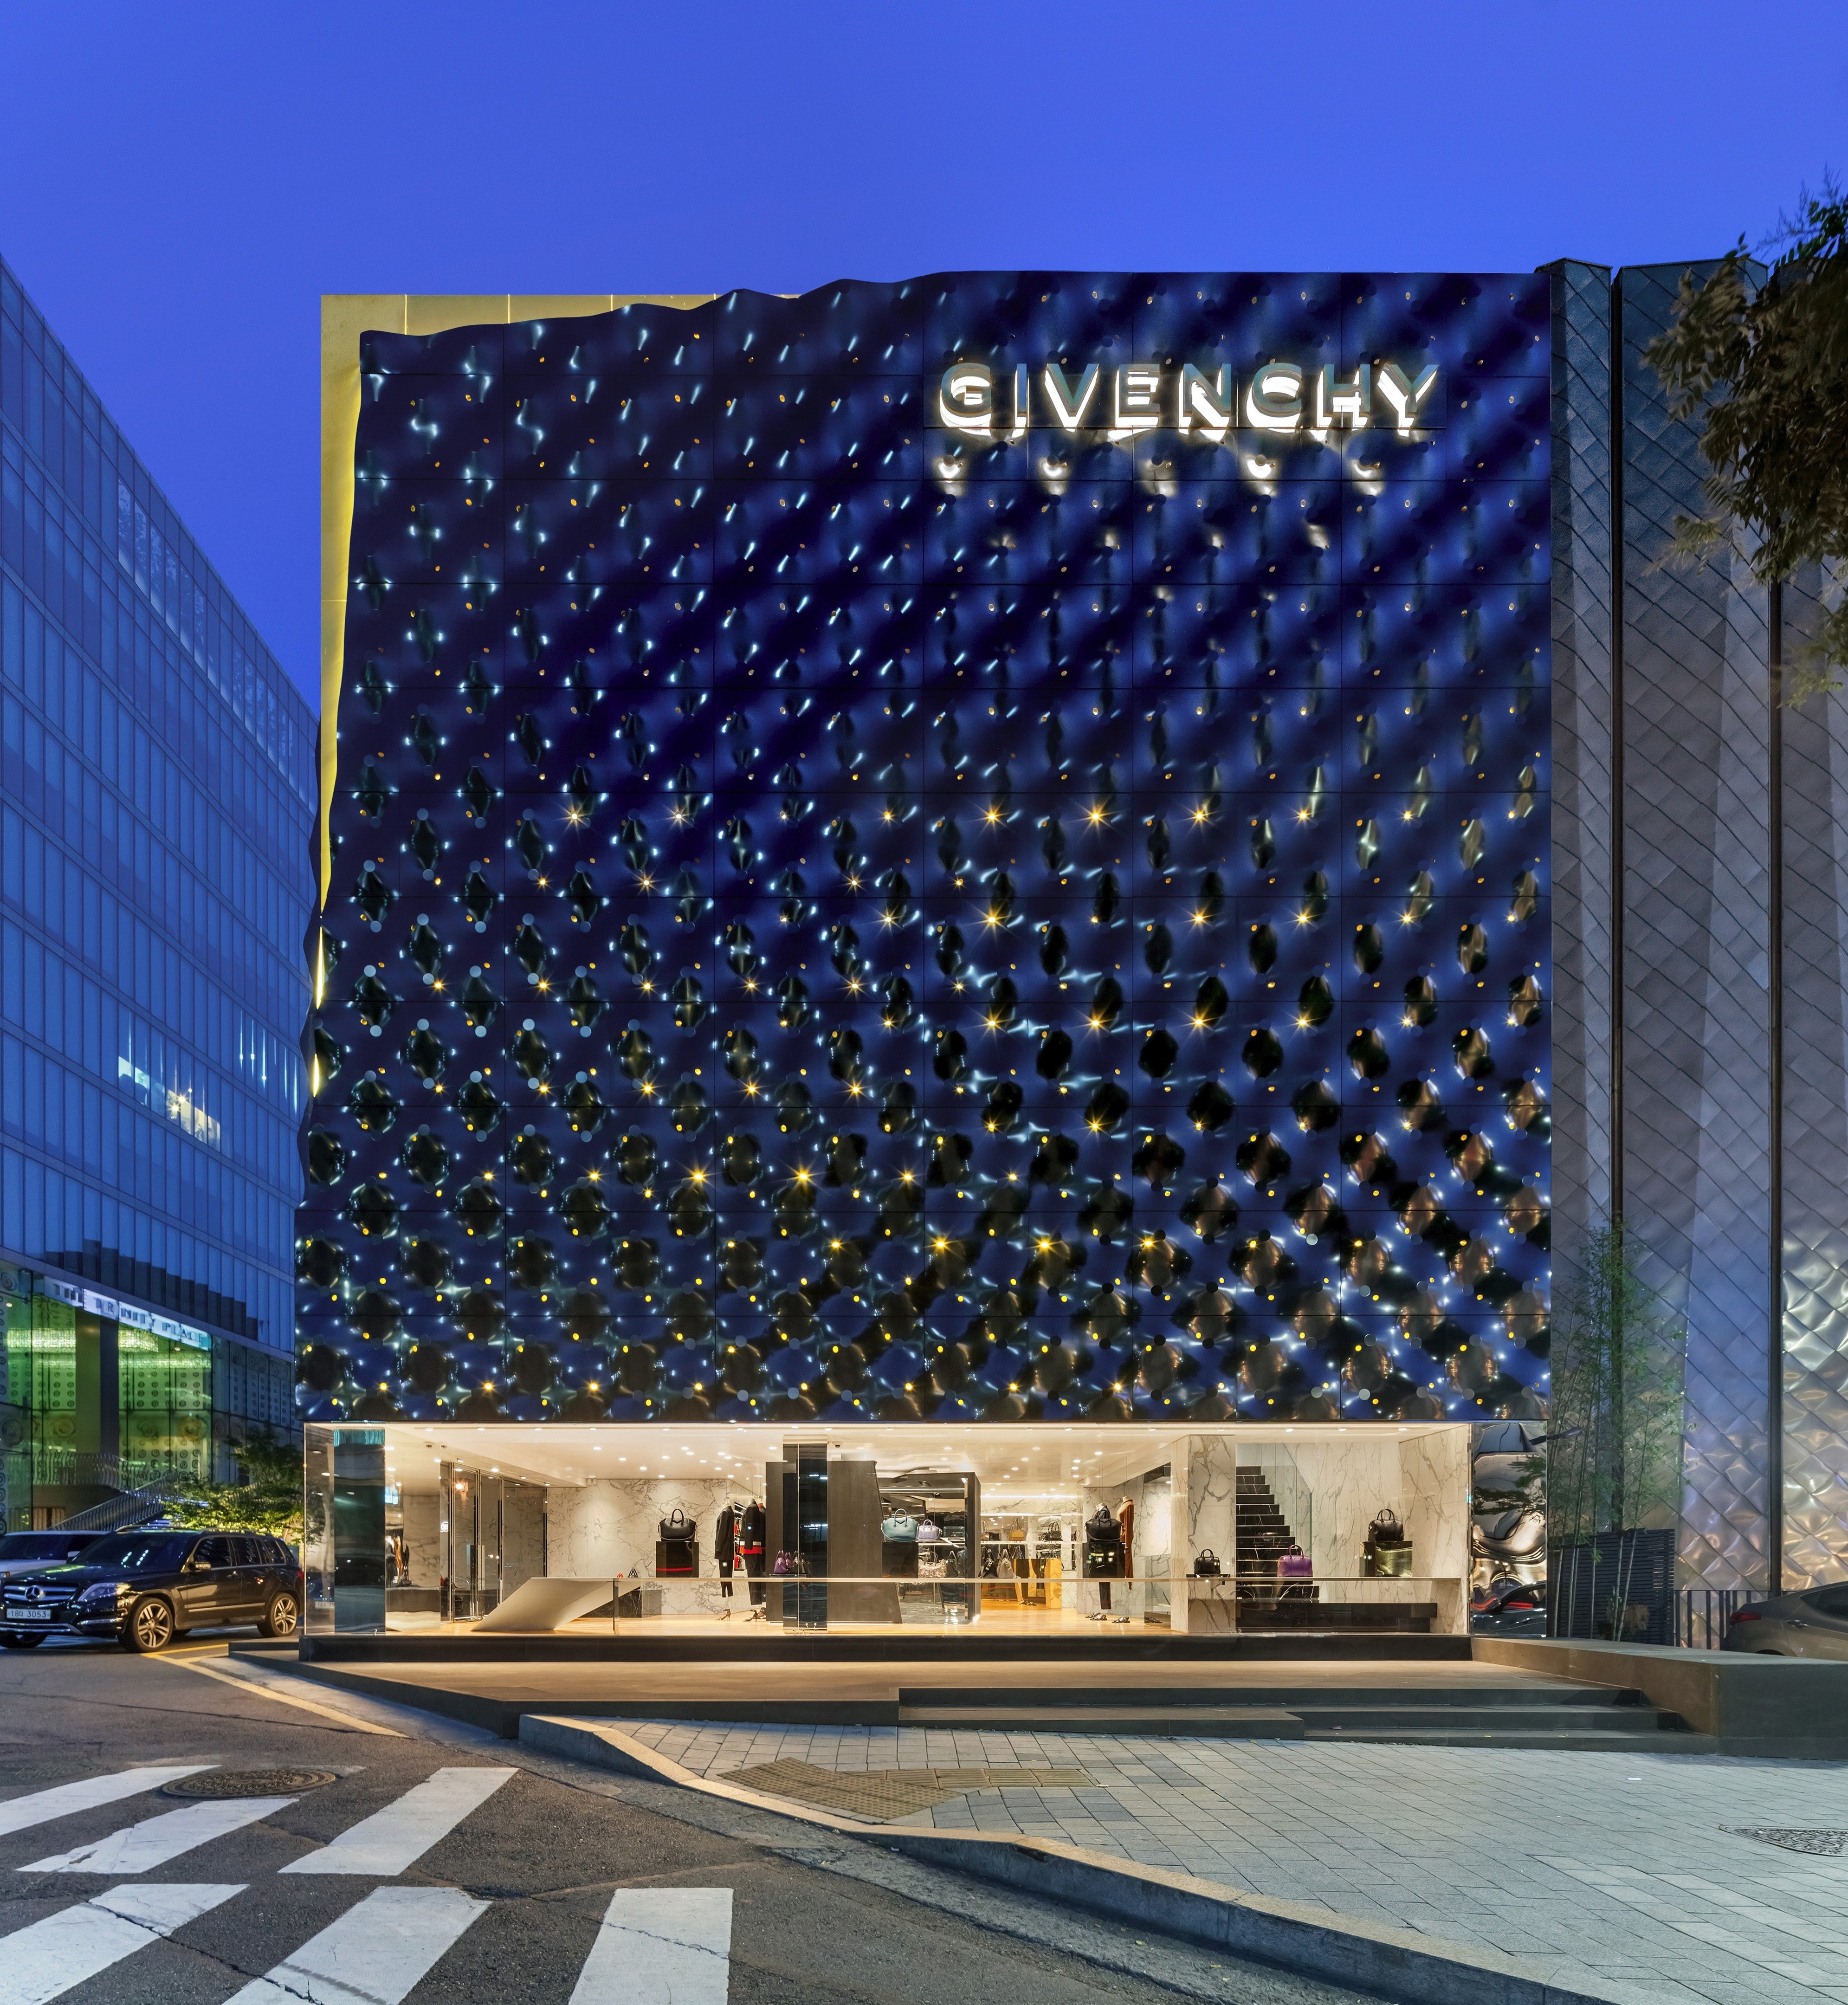 Givenchy - Store adress is: Ground Floor, Pacific Fair 2778A